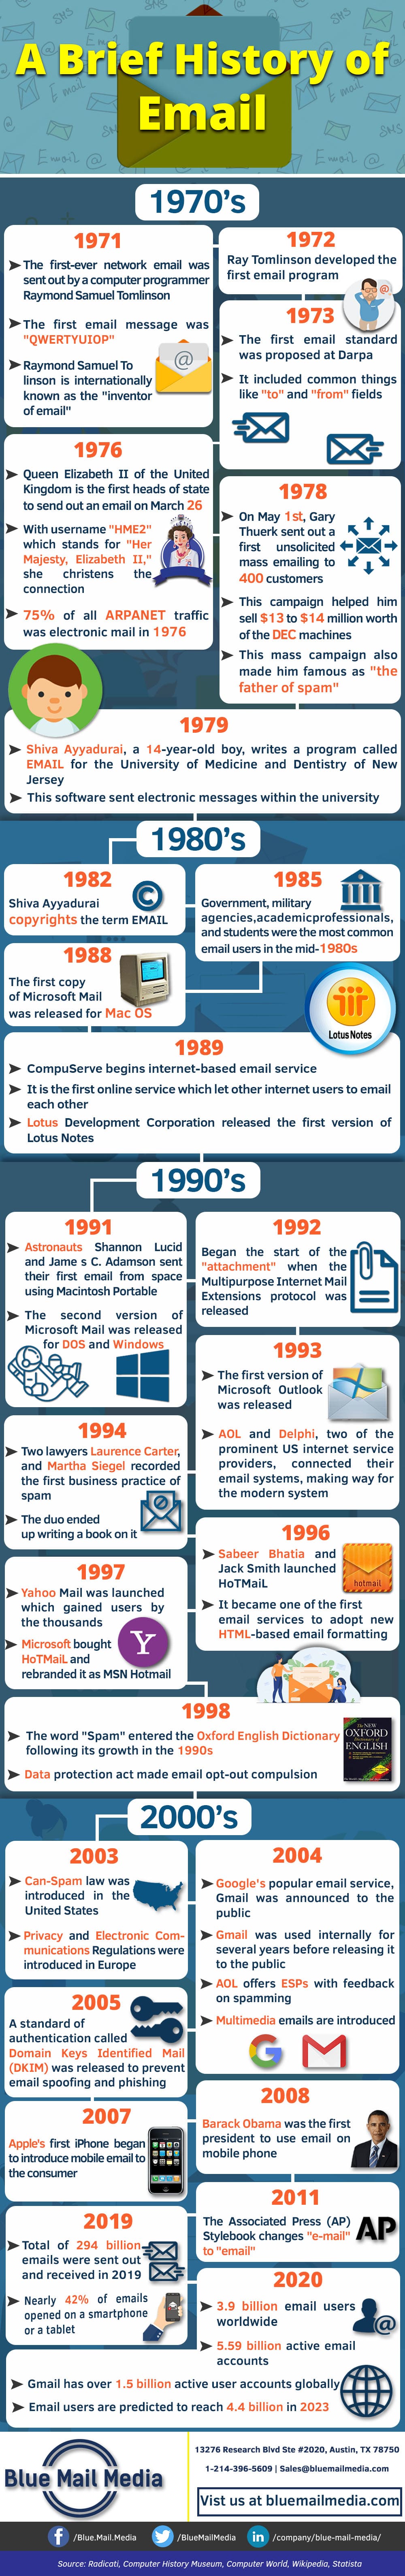 brief history of email